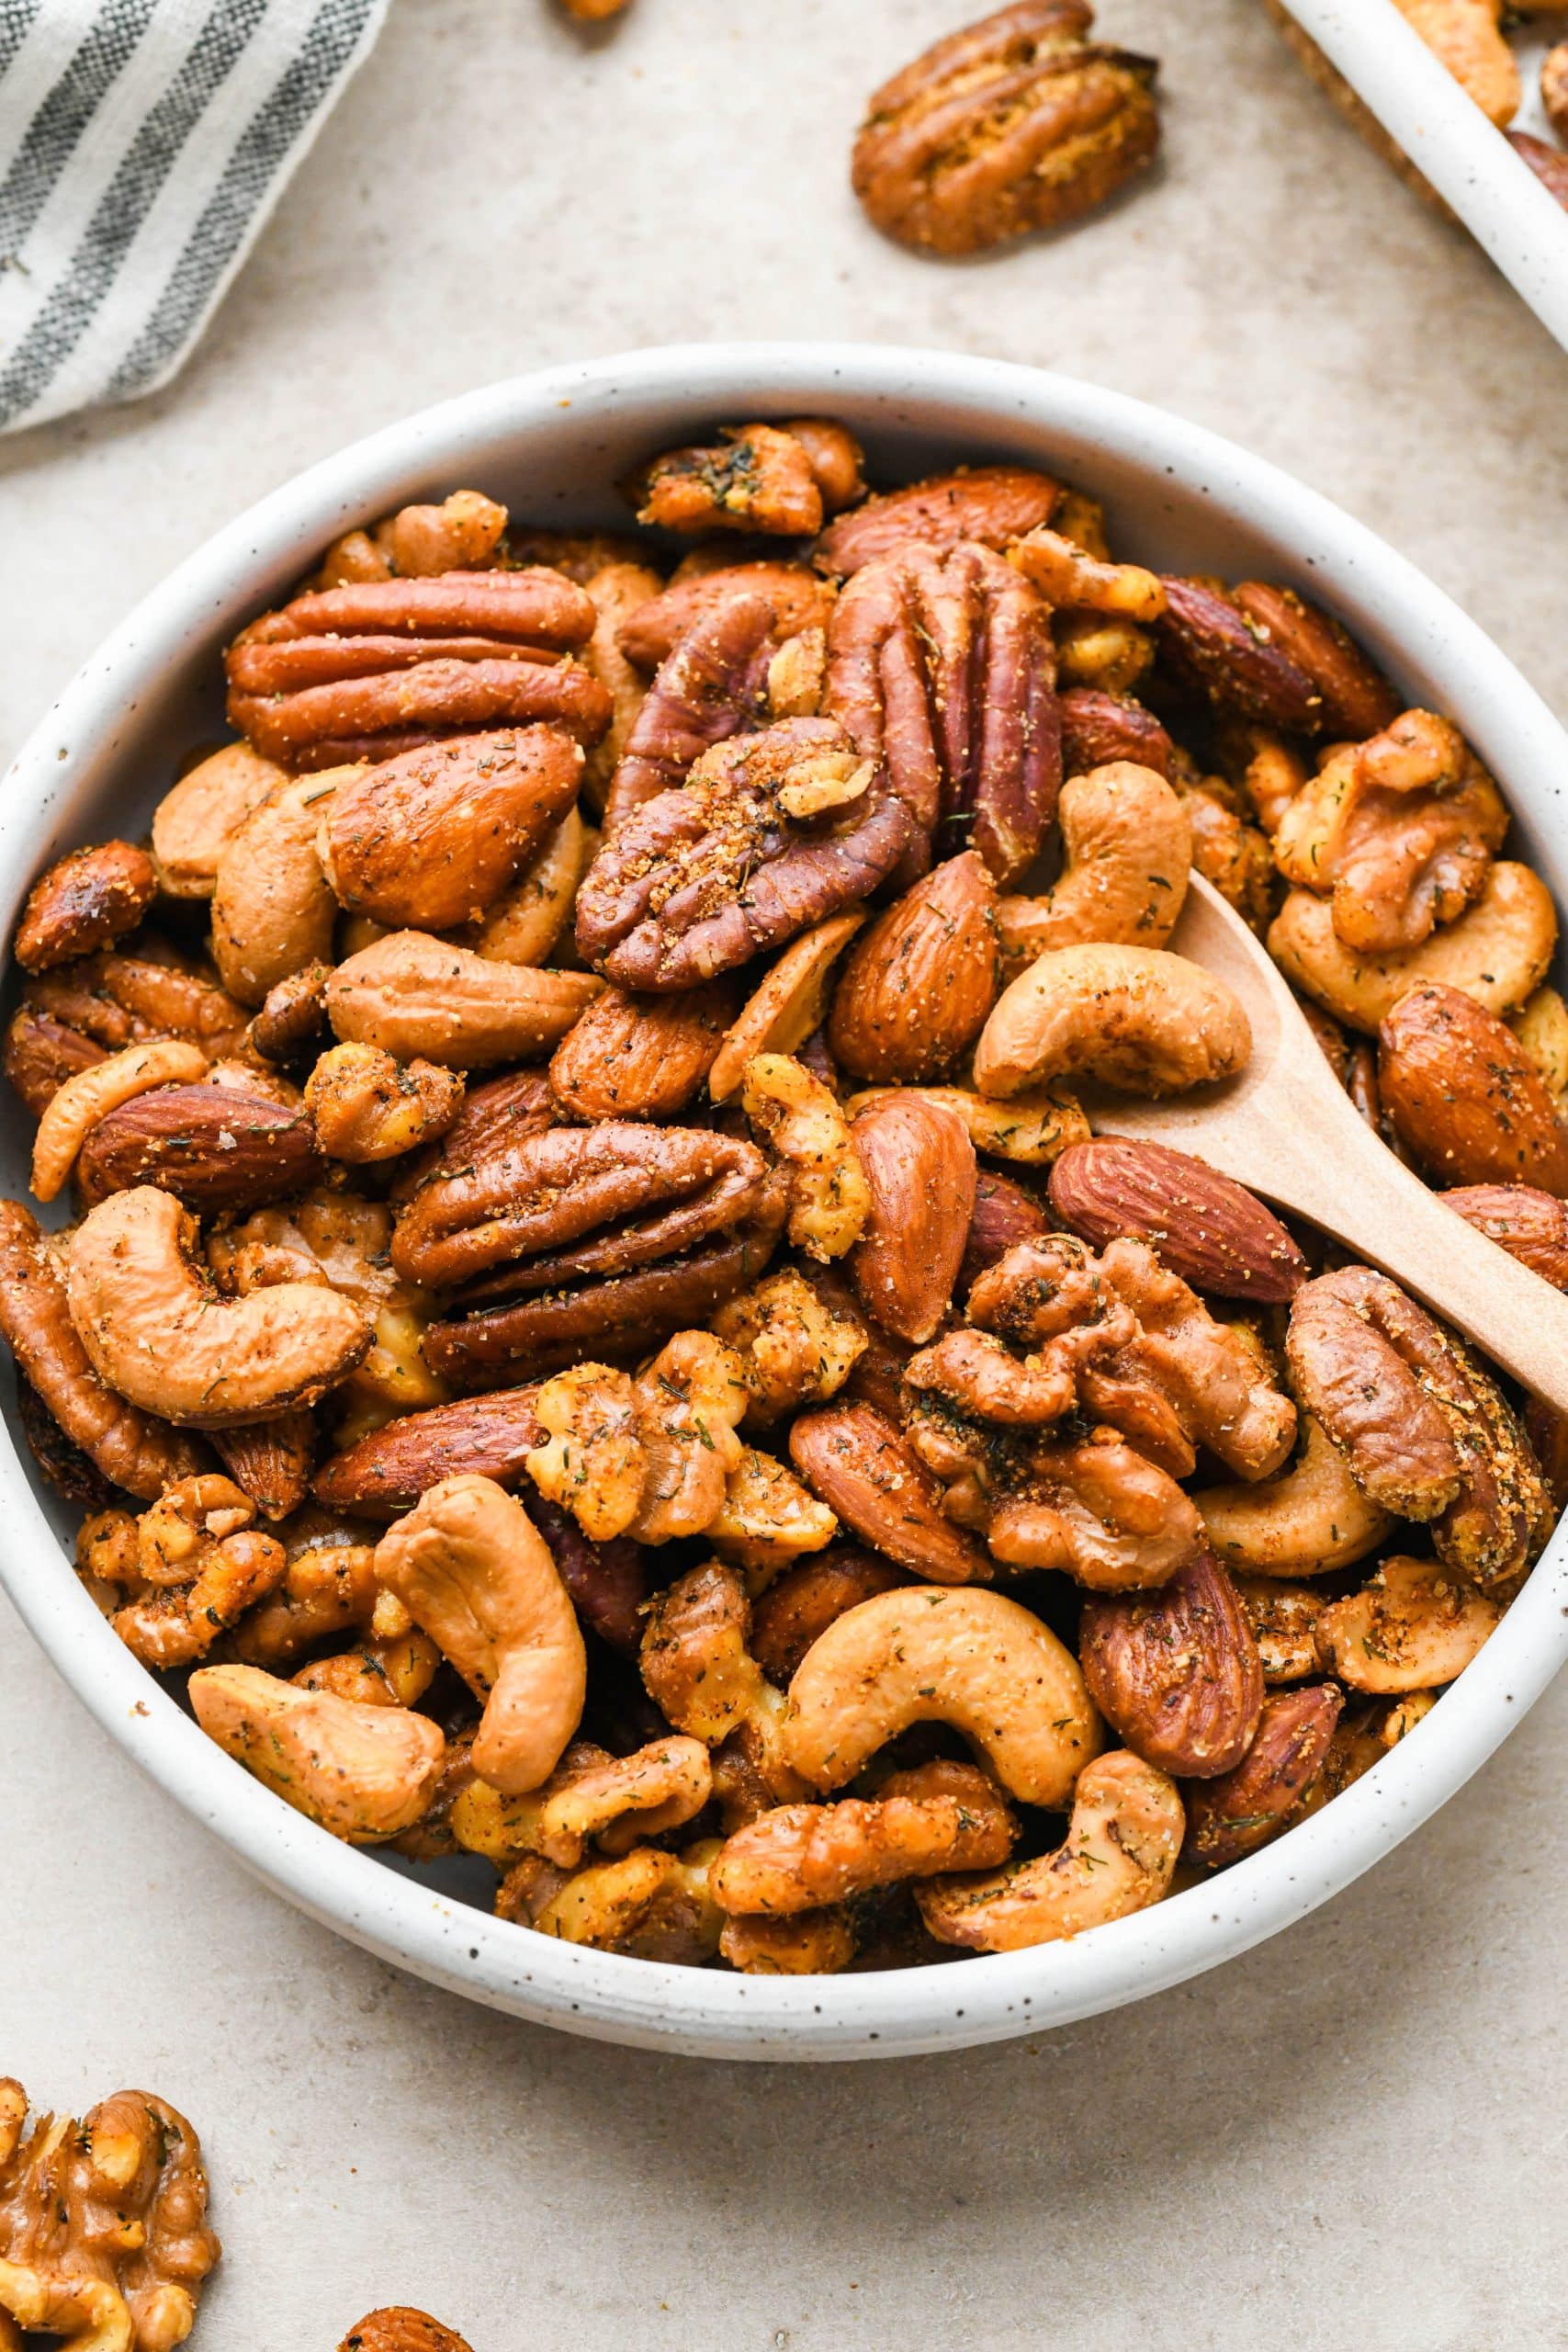 https://nyssaskitchen.com/wp-content/uploads/2017/11/Spiced-Nuts-33-scaled.jpg